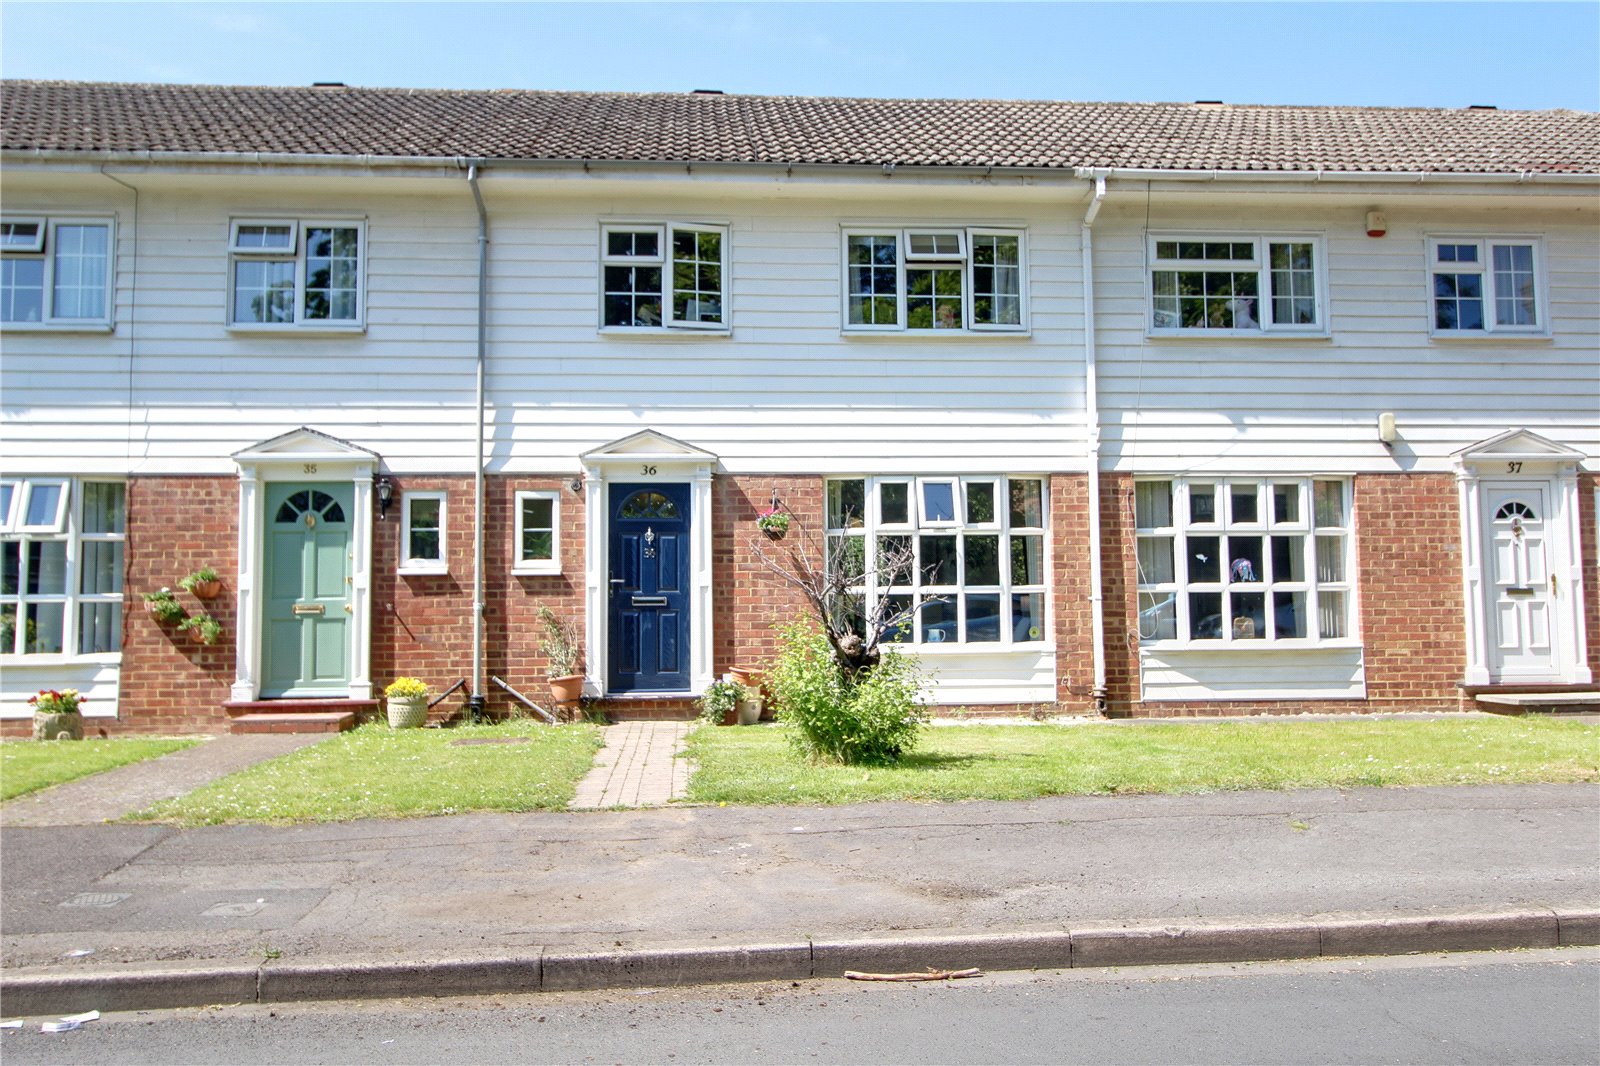 Parkers Reading 3 Bedroom House For Sale In Harrow Court